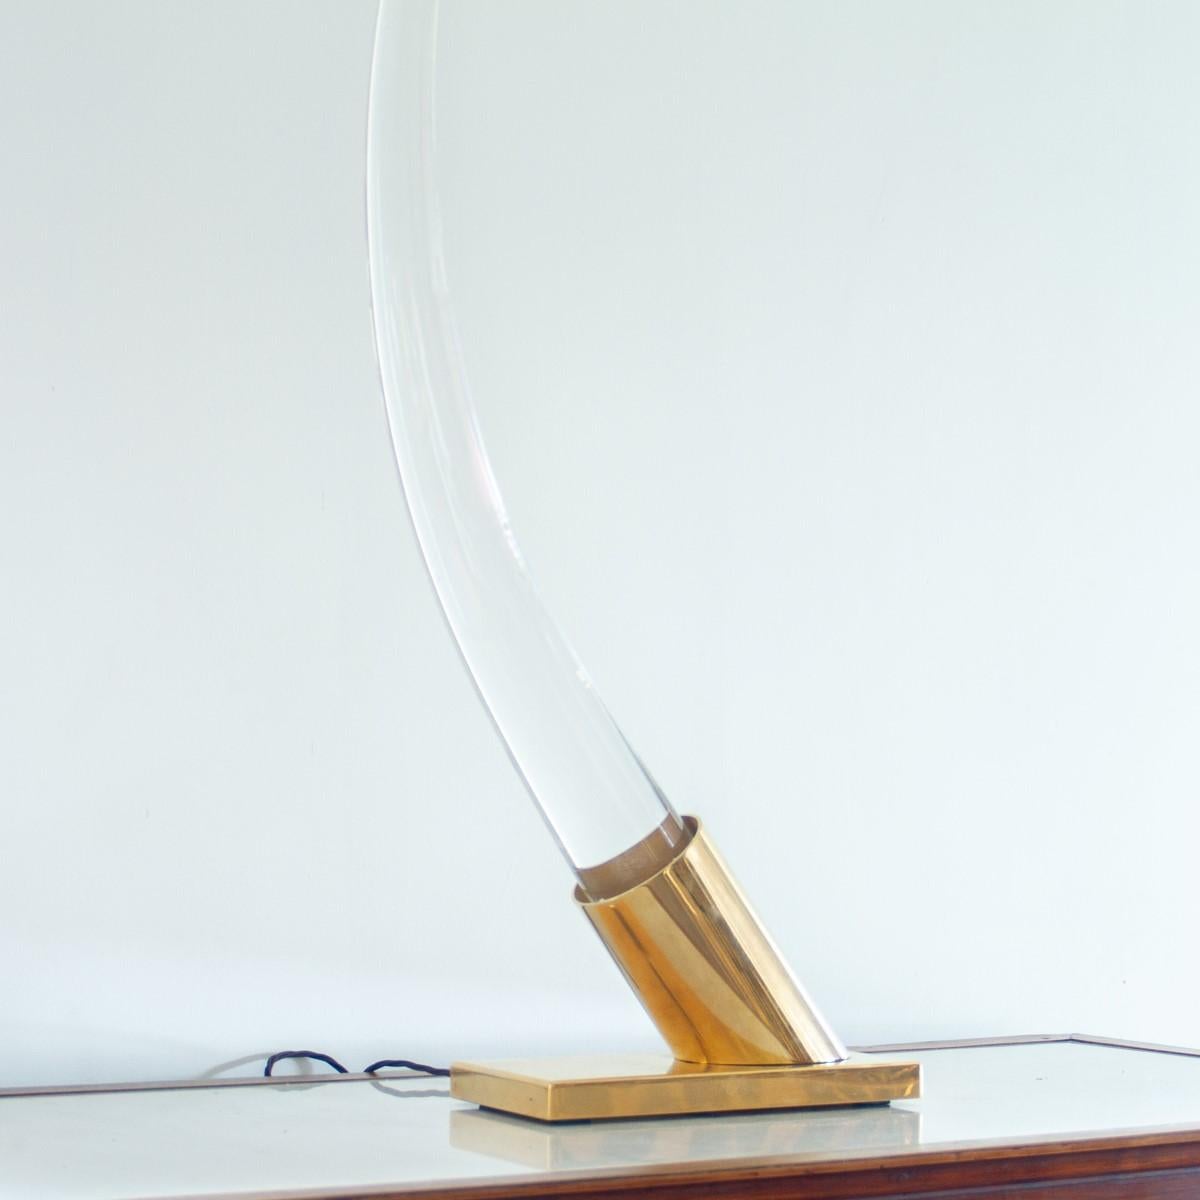 A large lucite sculptural tusk set in a yellow brass base by Oggetti. Oggetti were founded in 1975 and their goal was to show the USA, Italian design which it achieved by working with small ateliers.1980s. The Oggetti label is to the underside of